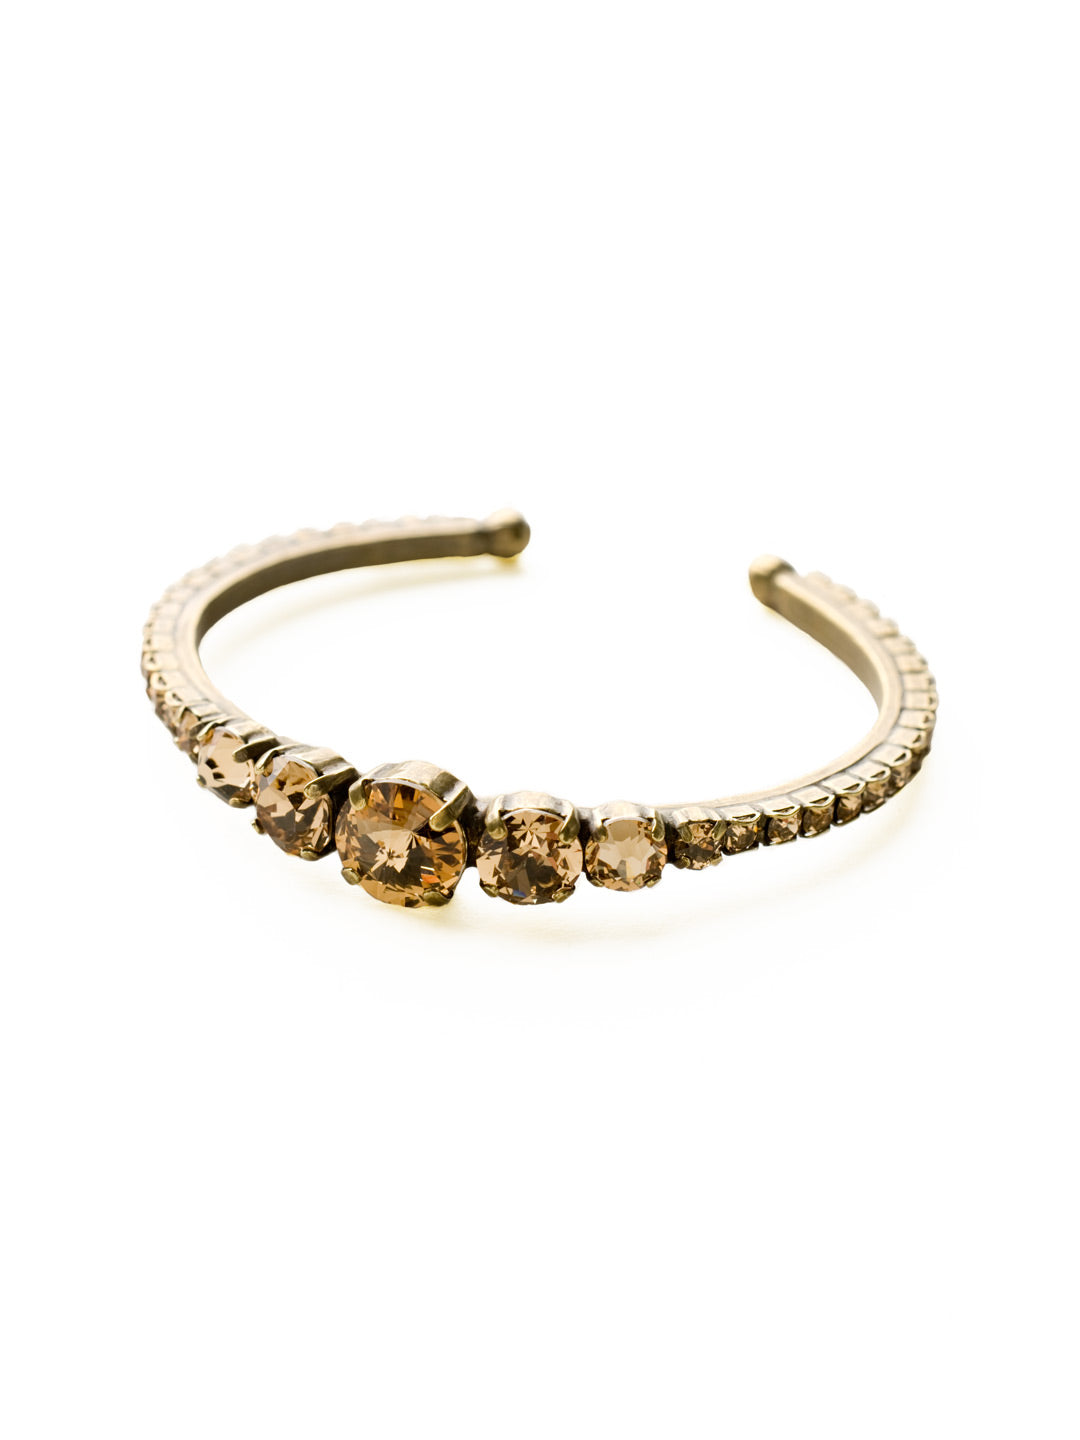 Dazzling Dotted Line Cuff Bracelet - BCQ14AGNT - <p>This cuff bracelet is pretty and petite yet packed with sparkle! Multi-sized round crystals cover this bracelet from end to end. Add this beauty to your current arm party or wear alone for a subtle statement. From Sorrelli's Neutral Territory collection in our Antique Gold-tone finish.</p>